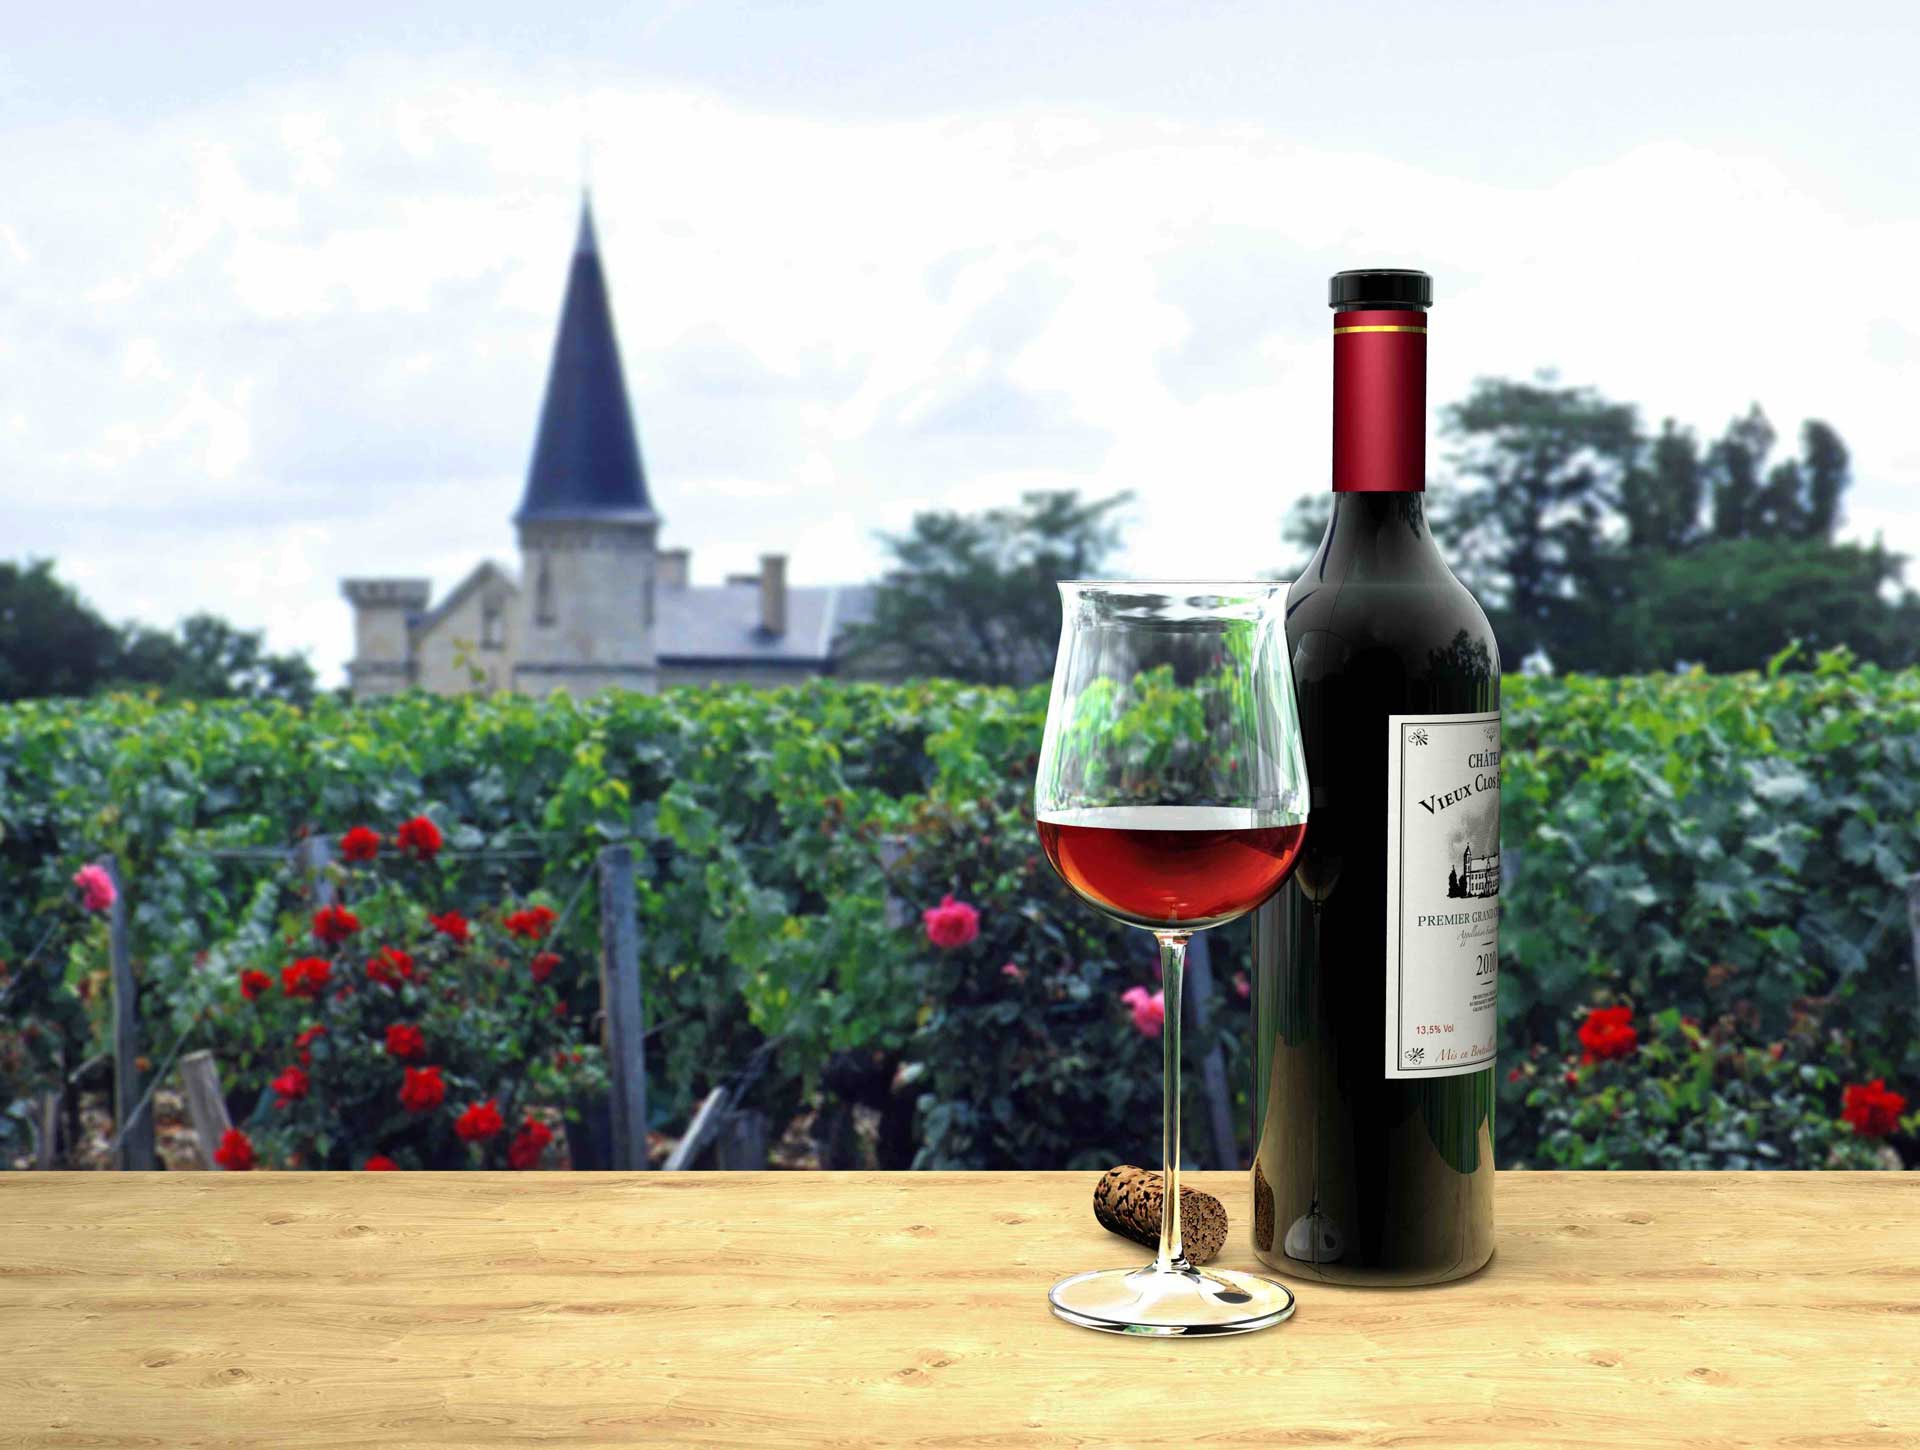 Bordeaux blends from around the globe